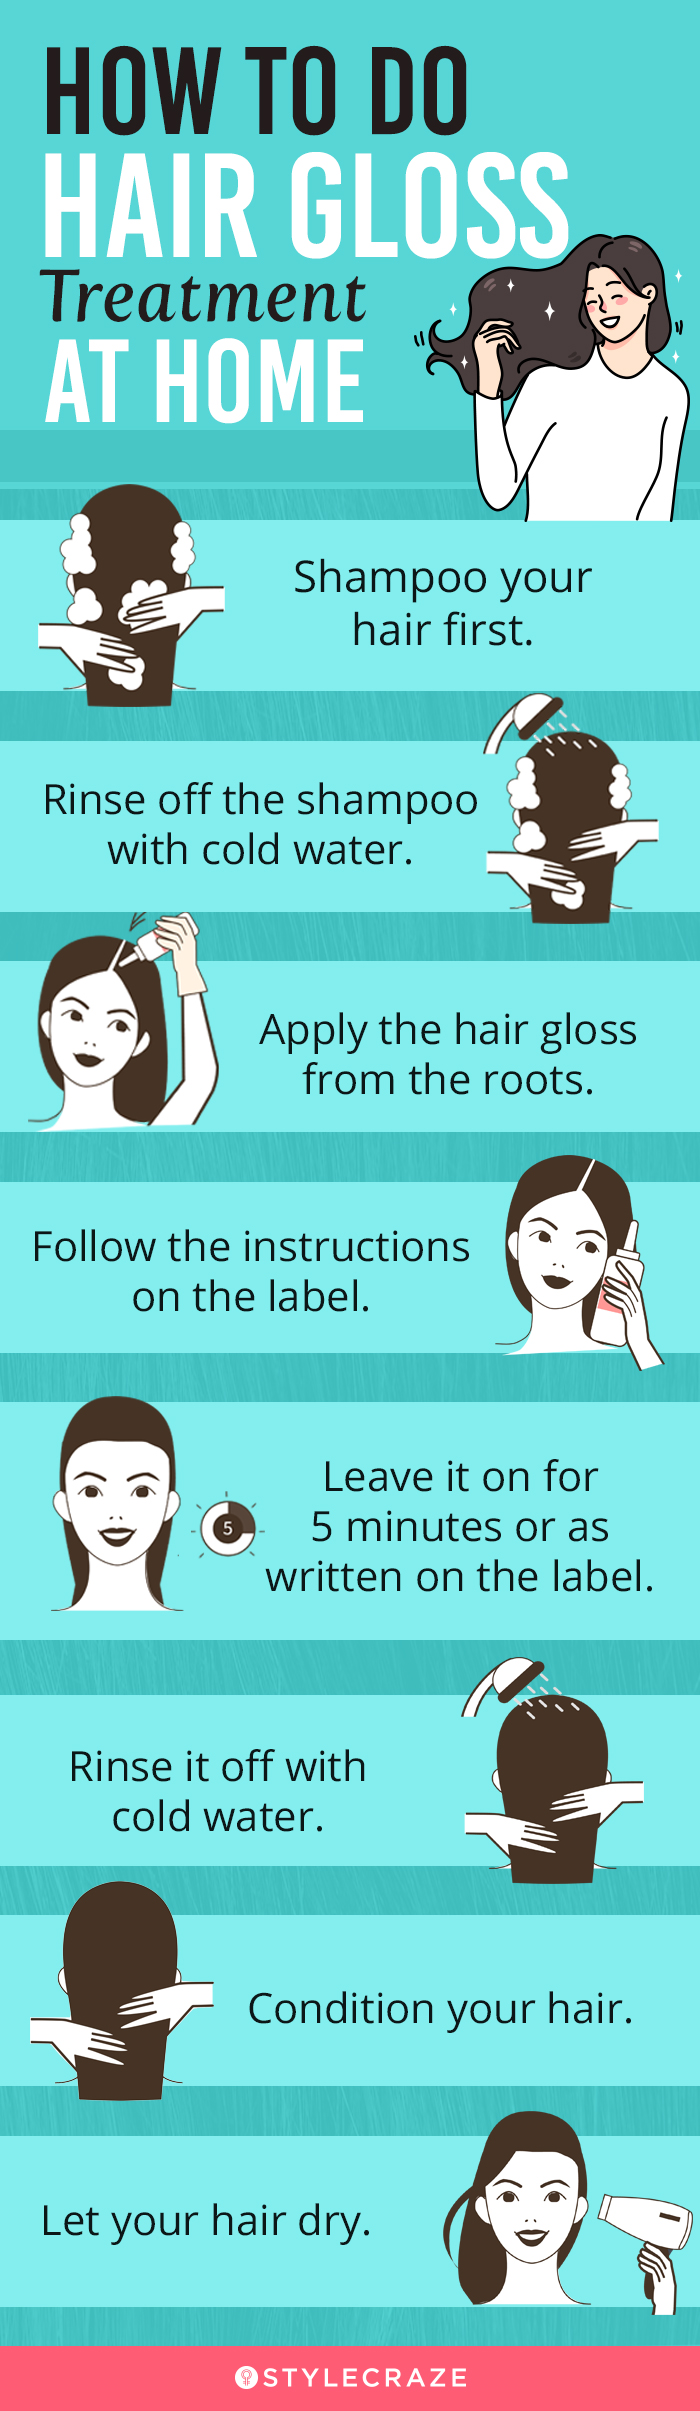 how to do hair gloss treament at home (infographic)